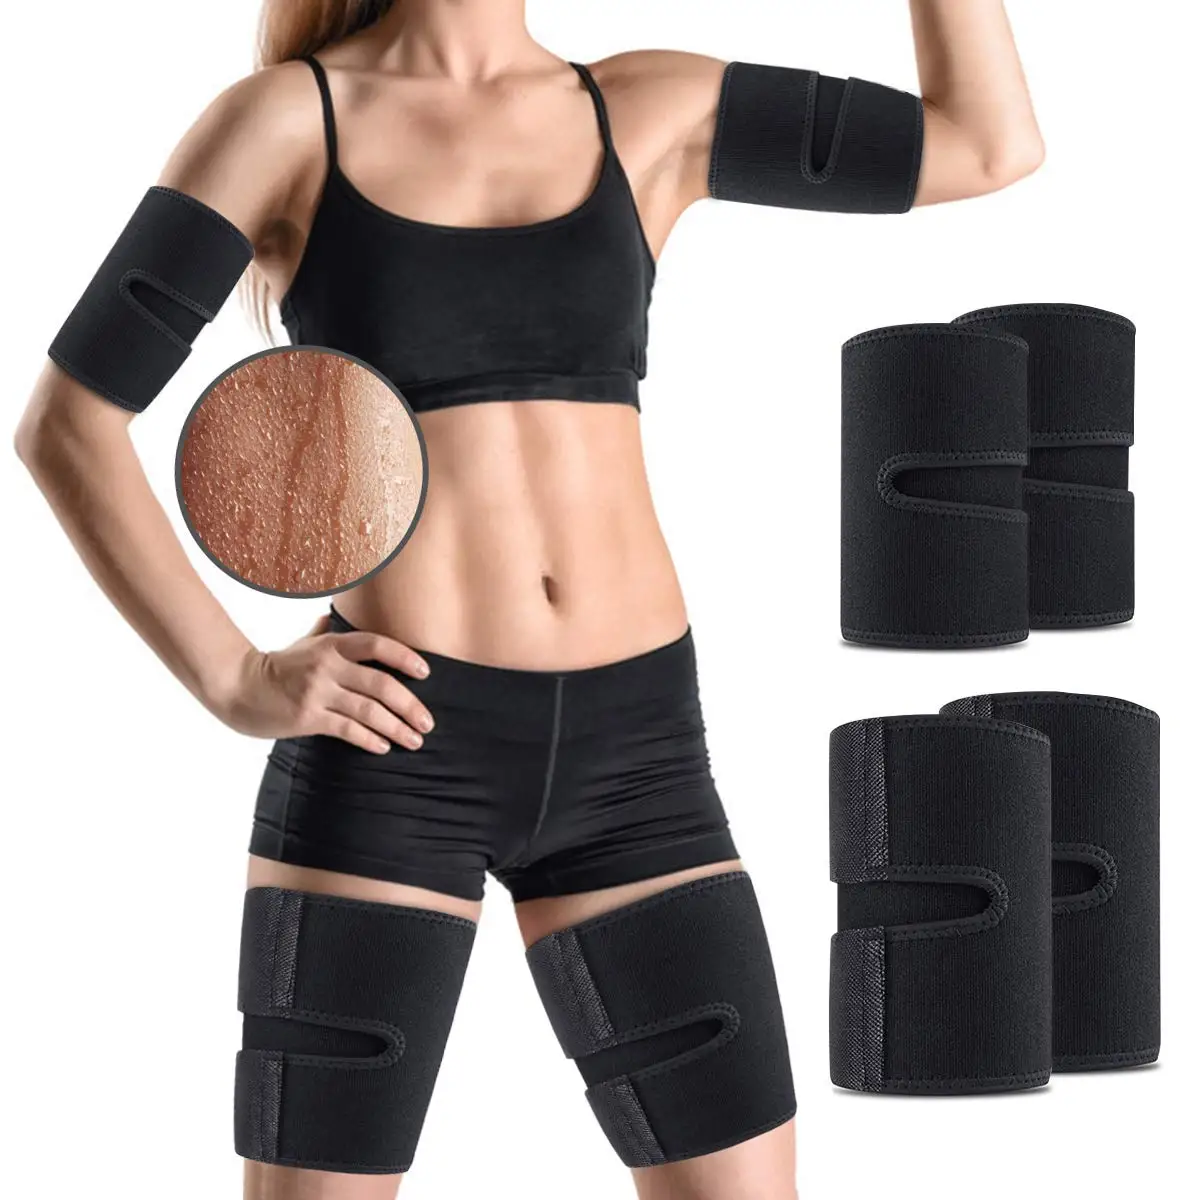 

Amazon Hot Selling Sweat Arm and Thigh Slimmer Bands Wraps Arm and Thigh Trimmer Basic Protection for Weight Loss Aviliable 2pcs, Black, pink, blue etc